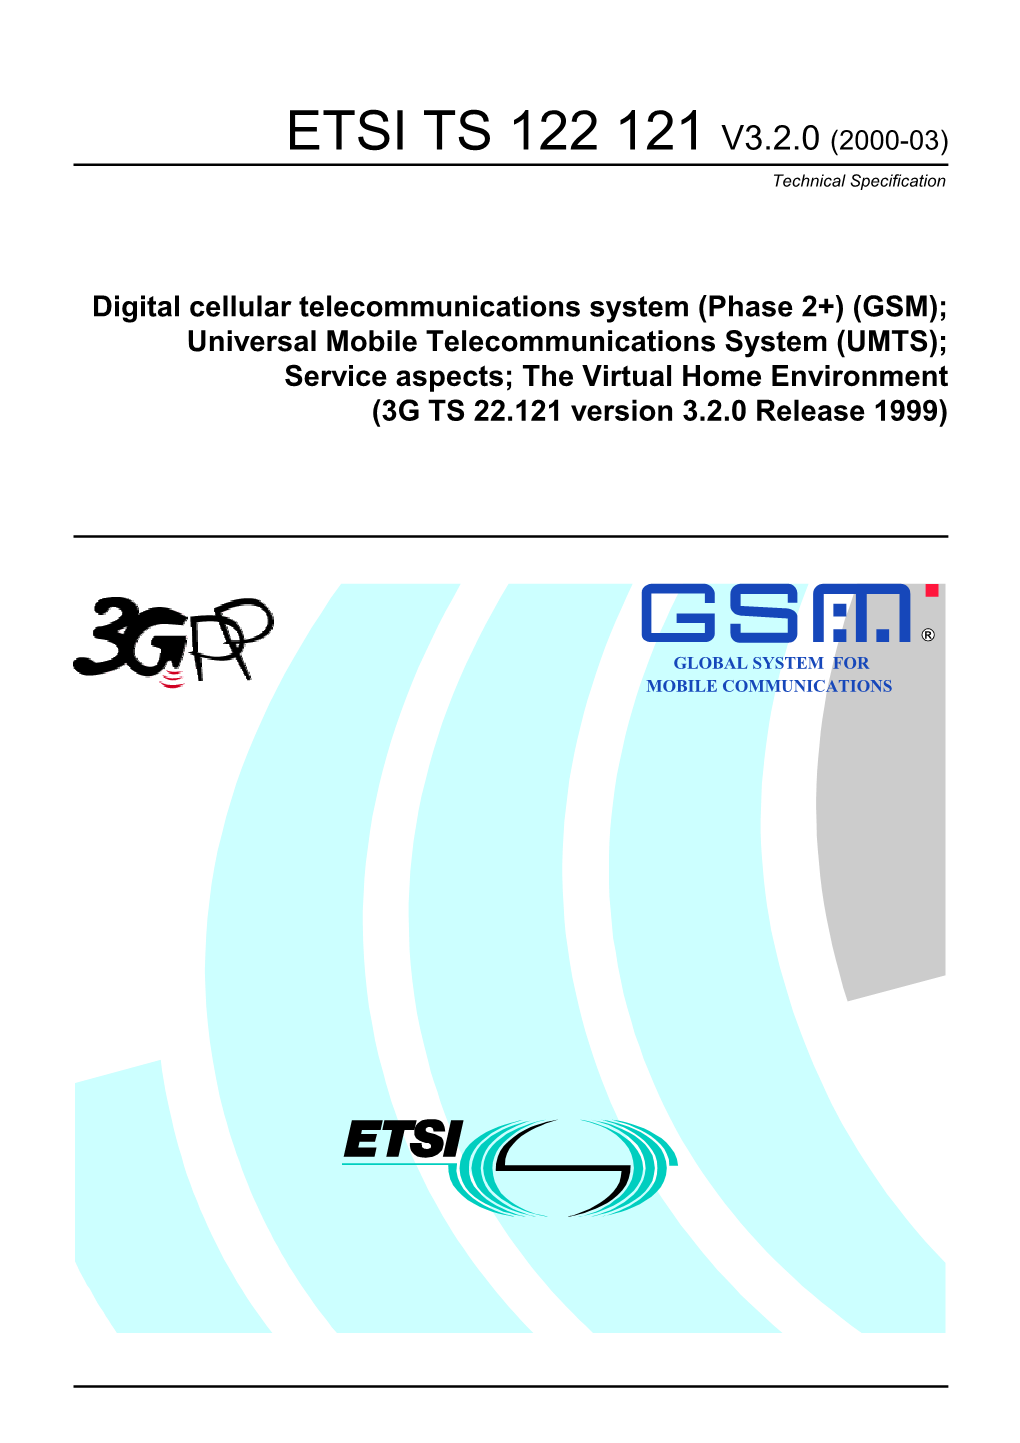 GSM); Universal Mobile Telecommunications System (UMTS); Service Aspects; the Virtual Home Environment (3G TS 22.121 Version 3.2.0 Release 1999)